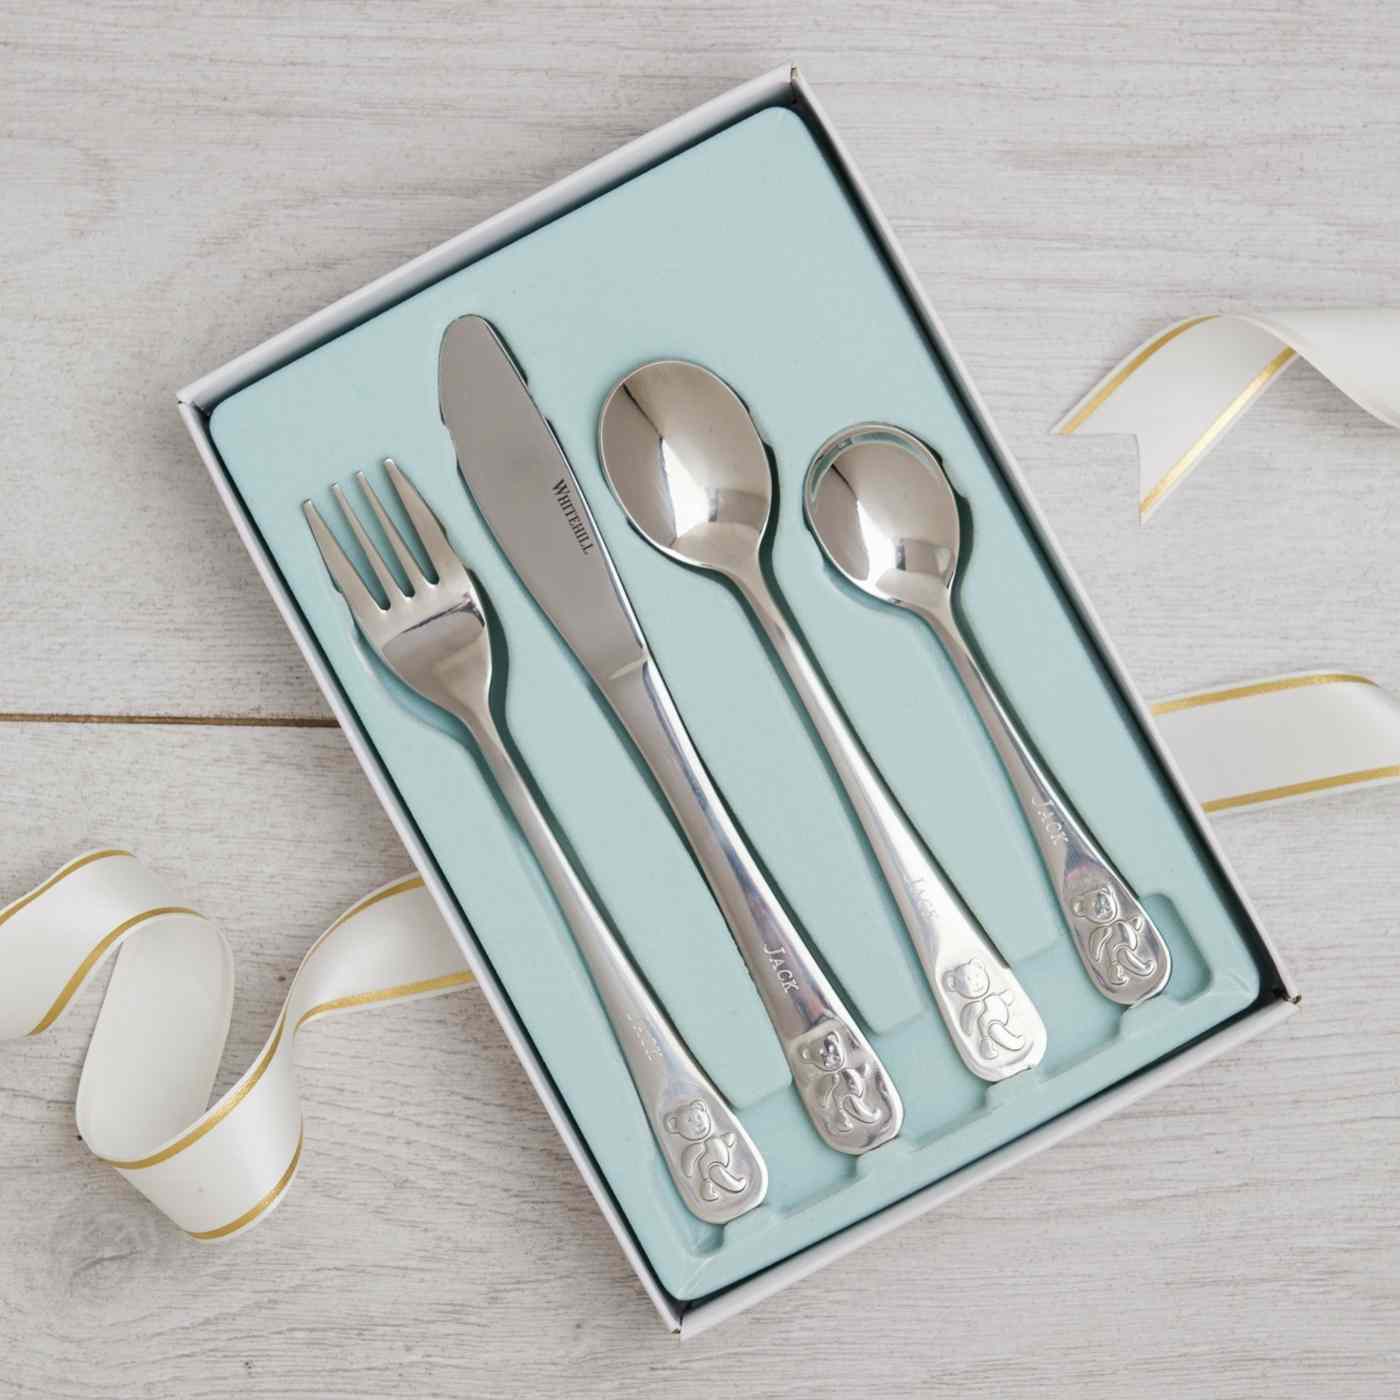 Cutlery as a gift for the 1st birthday with engraved names